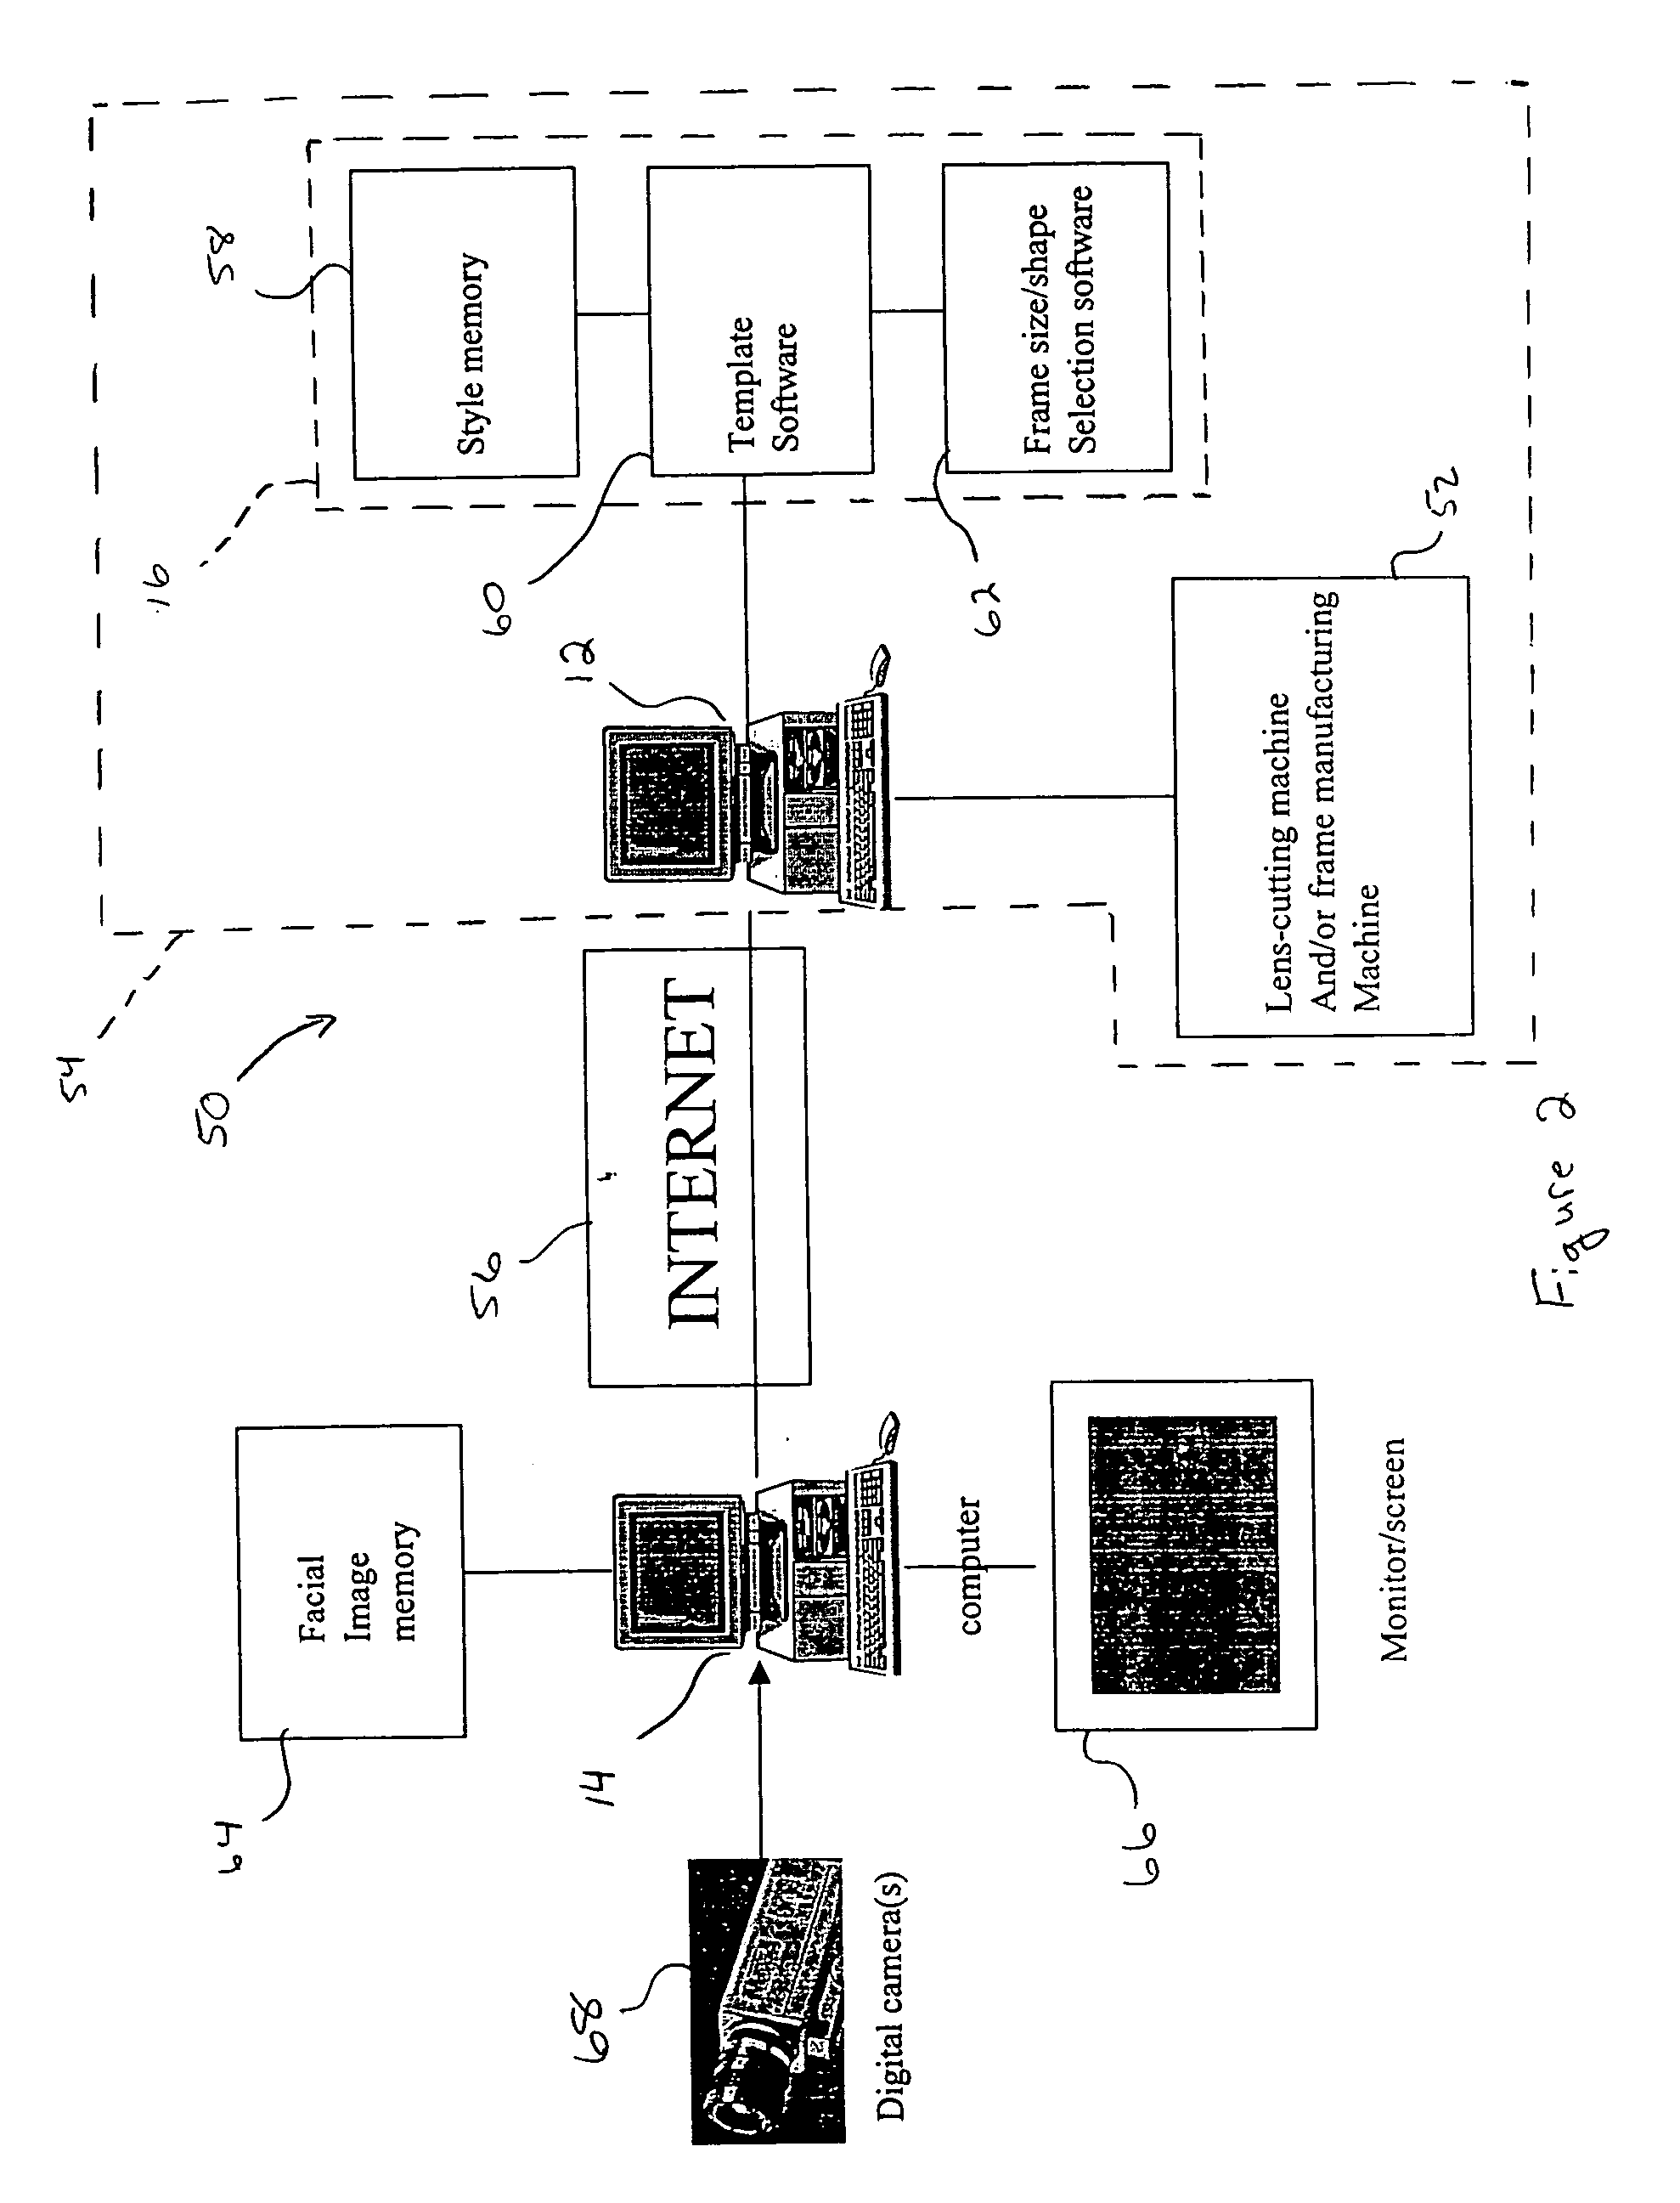 Method and system for selecting and designing eyeglass frames